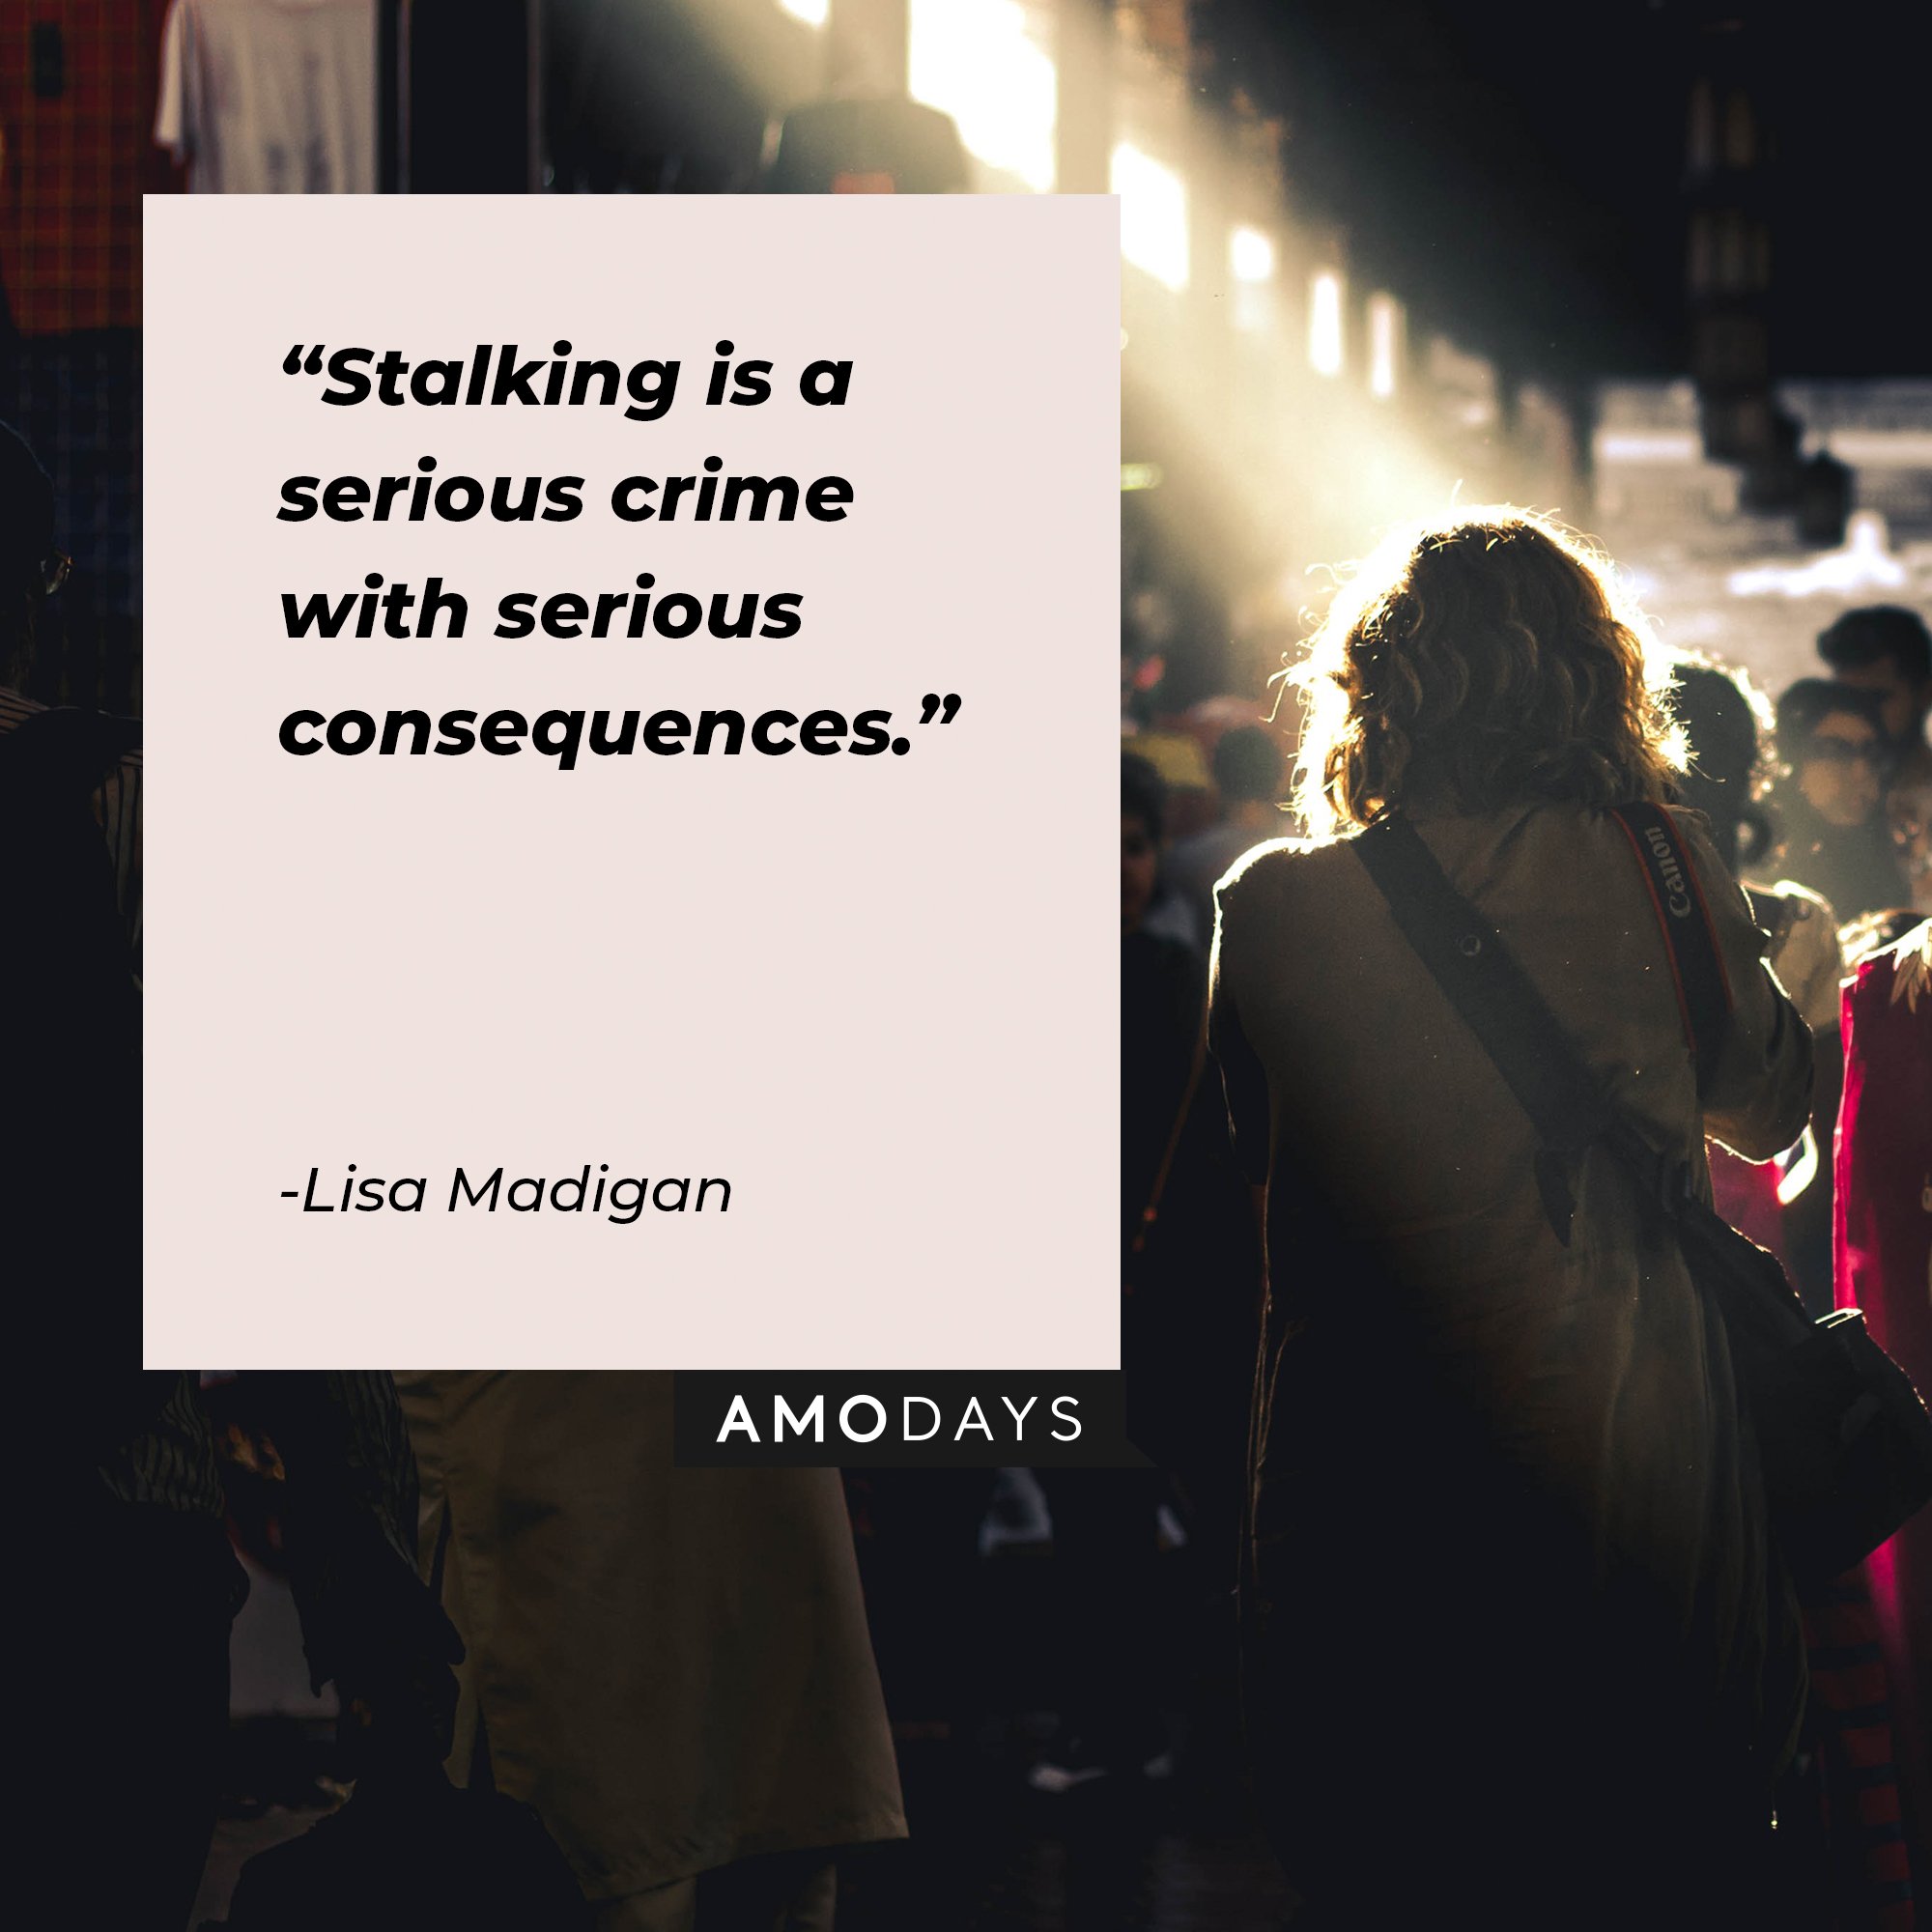 Lisa Madigan’s quote: "Stalking is a serious crime with serious consequences.” | Image: AmoDays